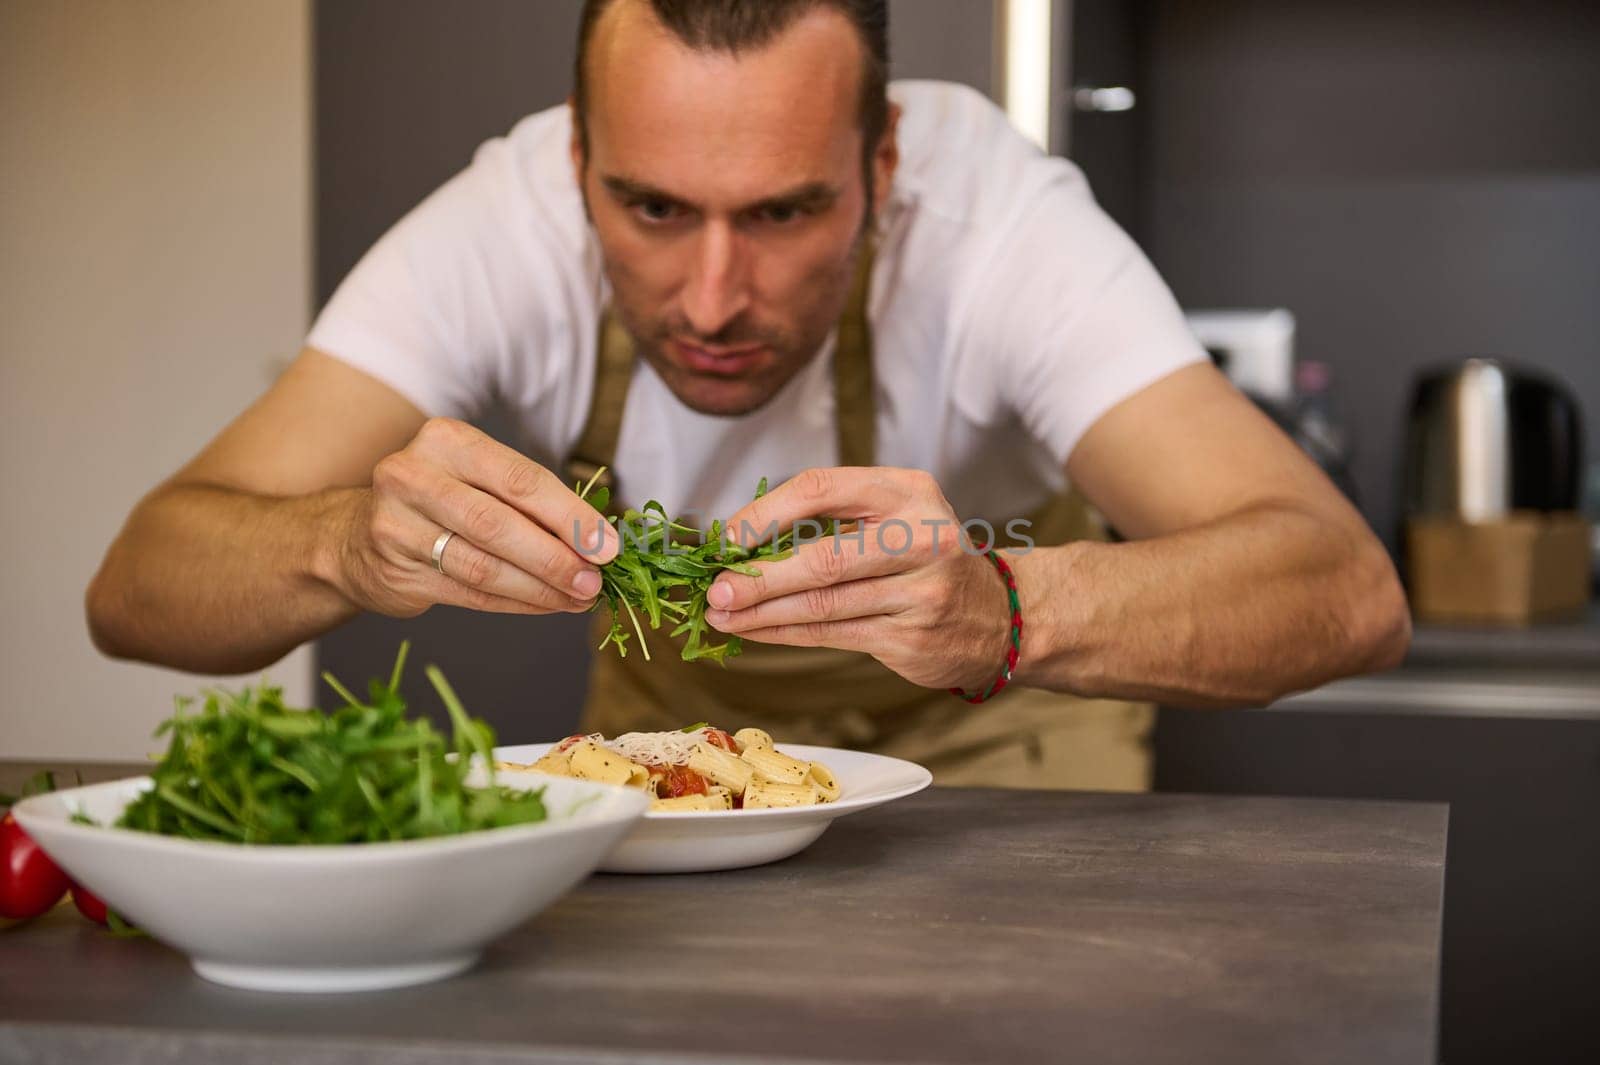 A man preparing dinner in home kitchen. Selective focus on hands holding greens for seasoning food. Male chef adding fresh green arugula leaves to Italian pasta with tomato sauce, garnishing the dish by artgf